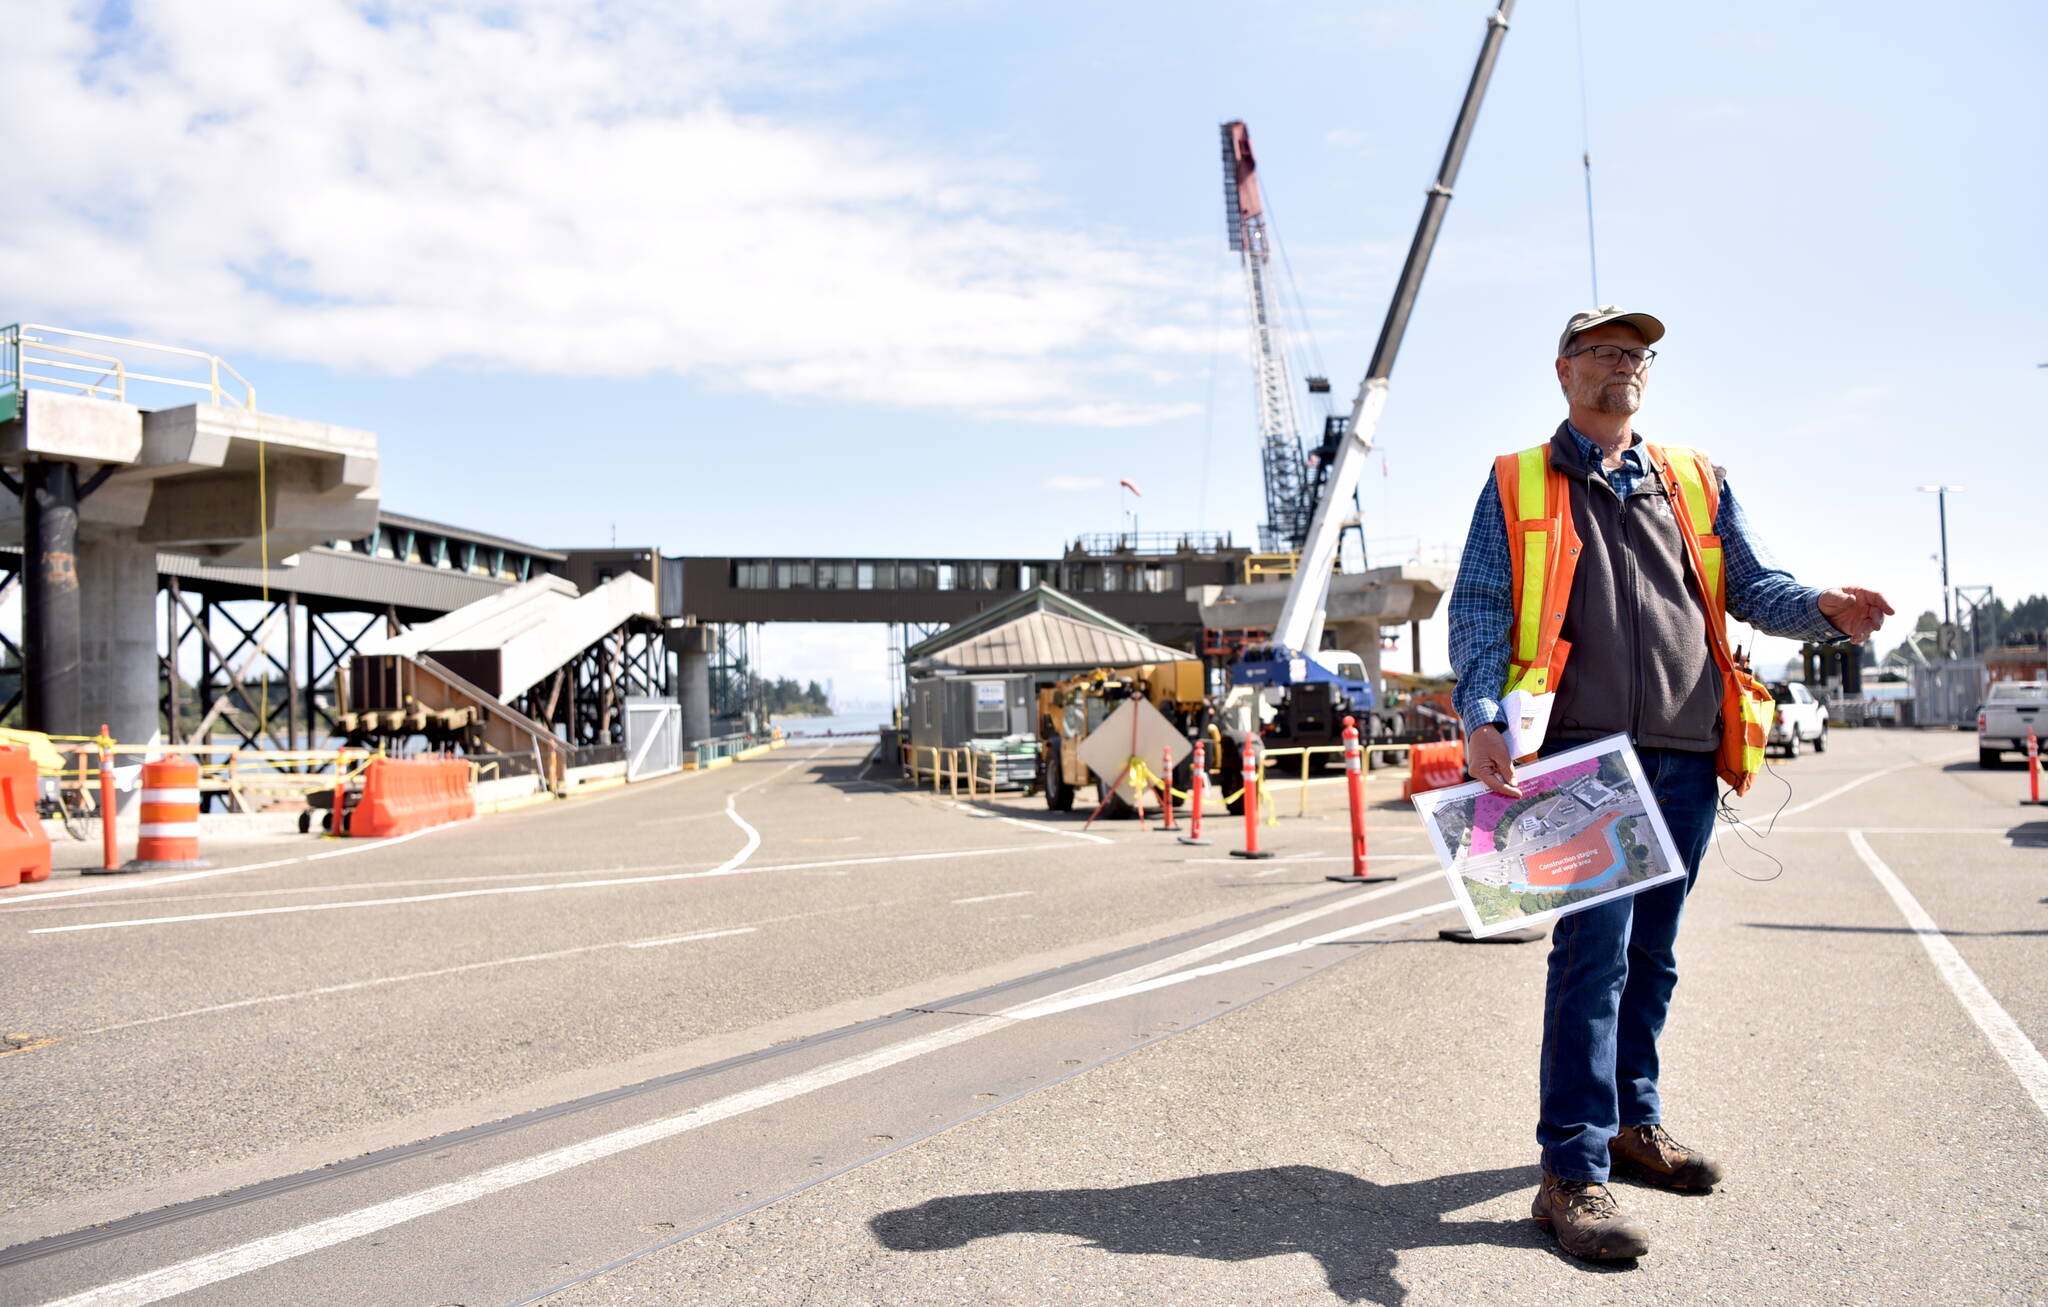 Nancy Treder/Kitsap News Group
Project engineer Tom Castor stands in front of the construction zone at the Bainbridge Island ferry terminal where crews will begin setting four bridge spans totaling 338 feet in length onto giant concrete and steel footings. The work will shut down drive-on service for vehicles Sept. 7-13. Commuters who need to use their cars must use the Bremerton or Kingston ferry terminals instead.